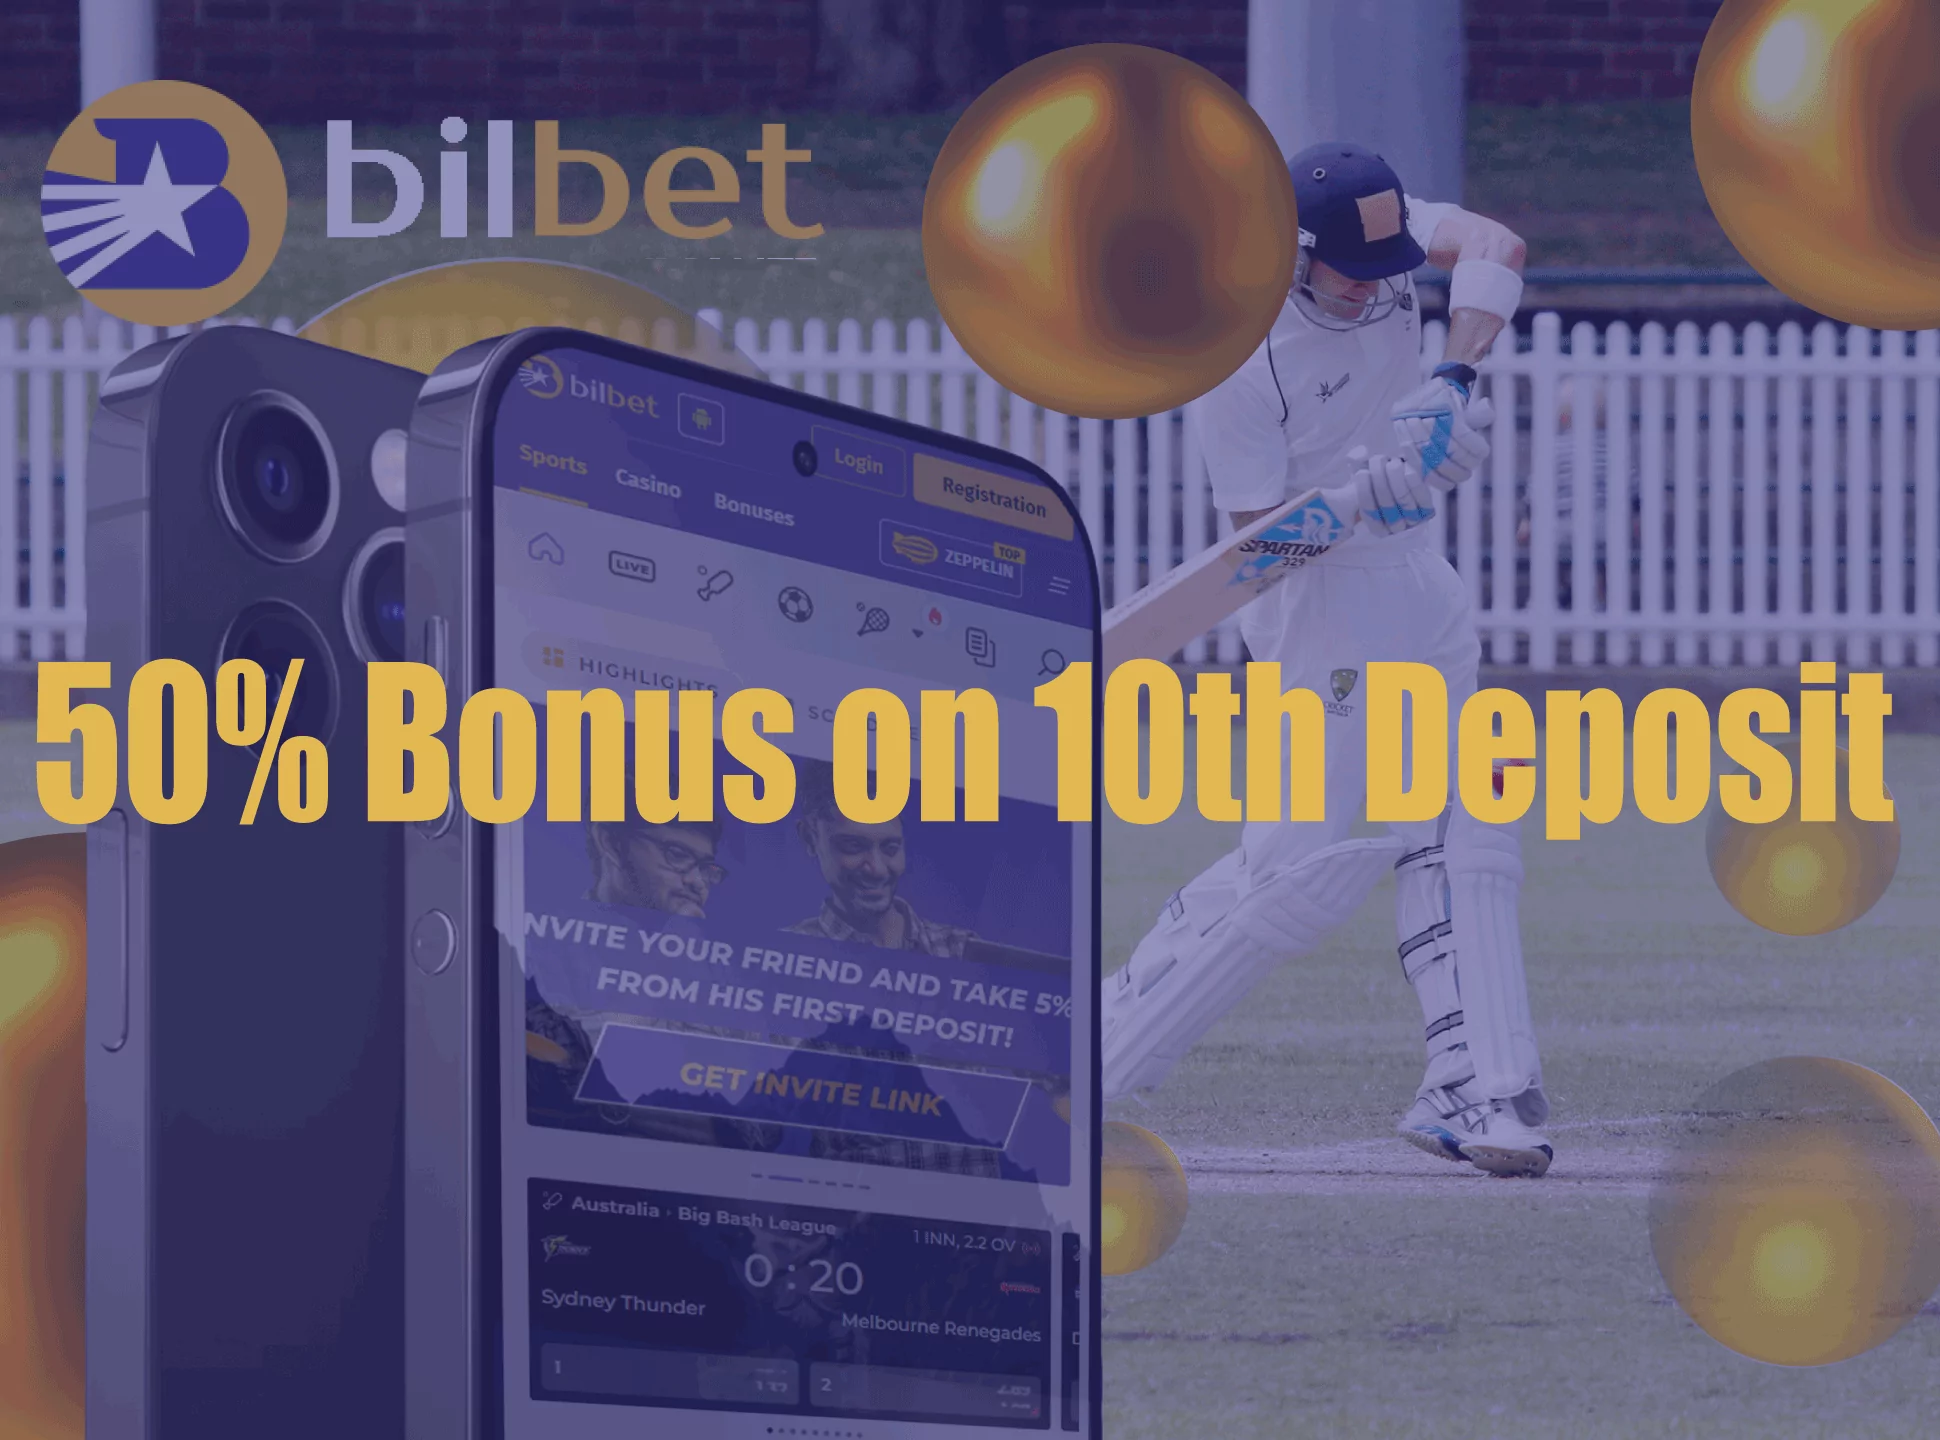 You can also get a 50% bonus after the 10th deposit.